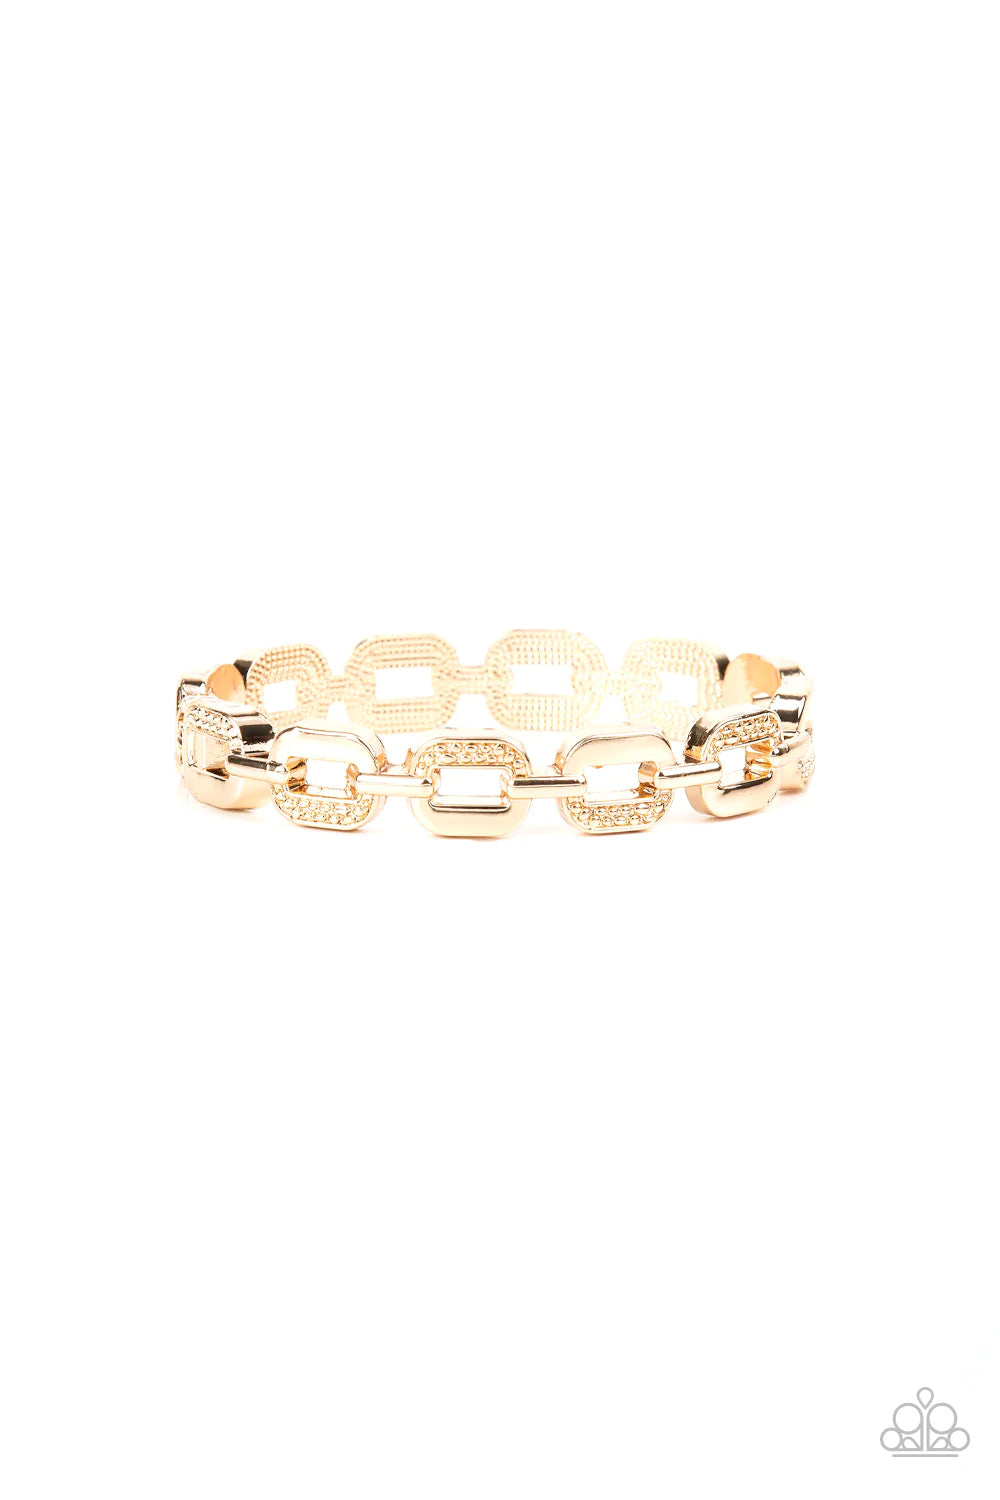 Paparazzi Accessories Powerhouse Plunder - Gold Alternating in sections of dotted texture, an oversized collection of gold chain links interlock into a solid bangle-like bracelet around the wrist. Features a hinged closure. Sold as one individual bracelet